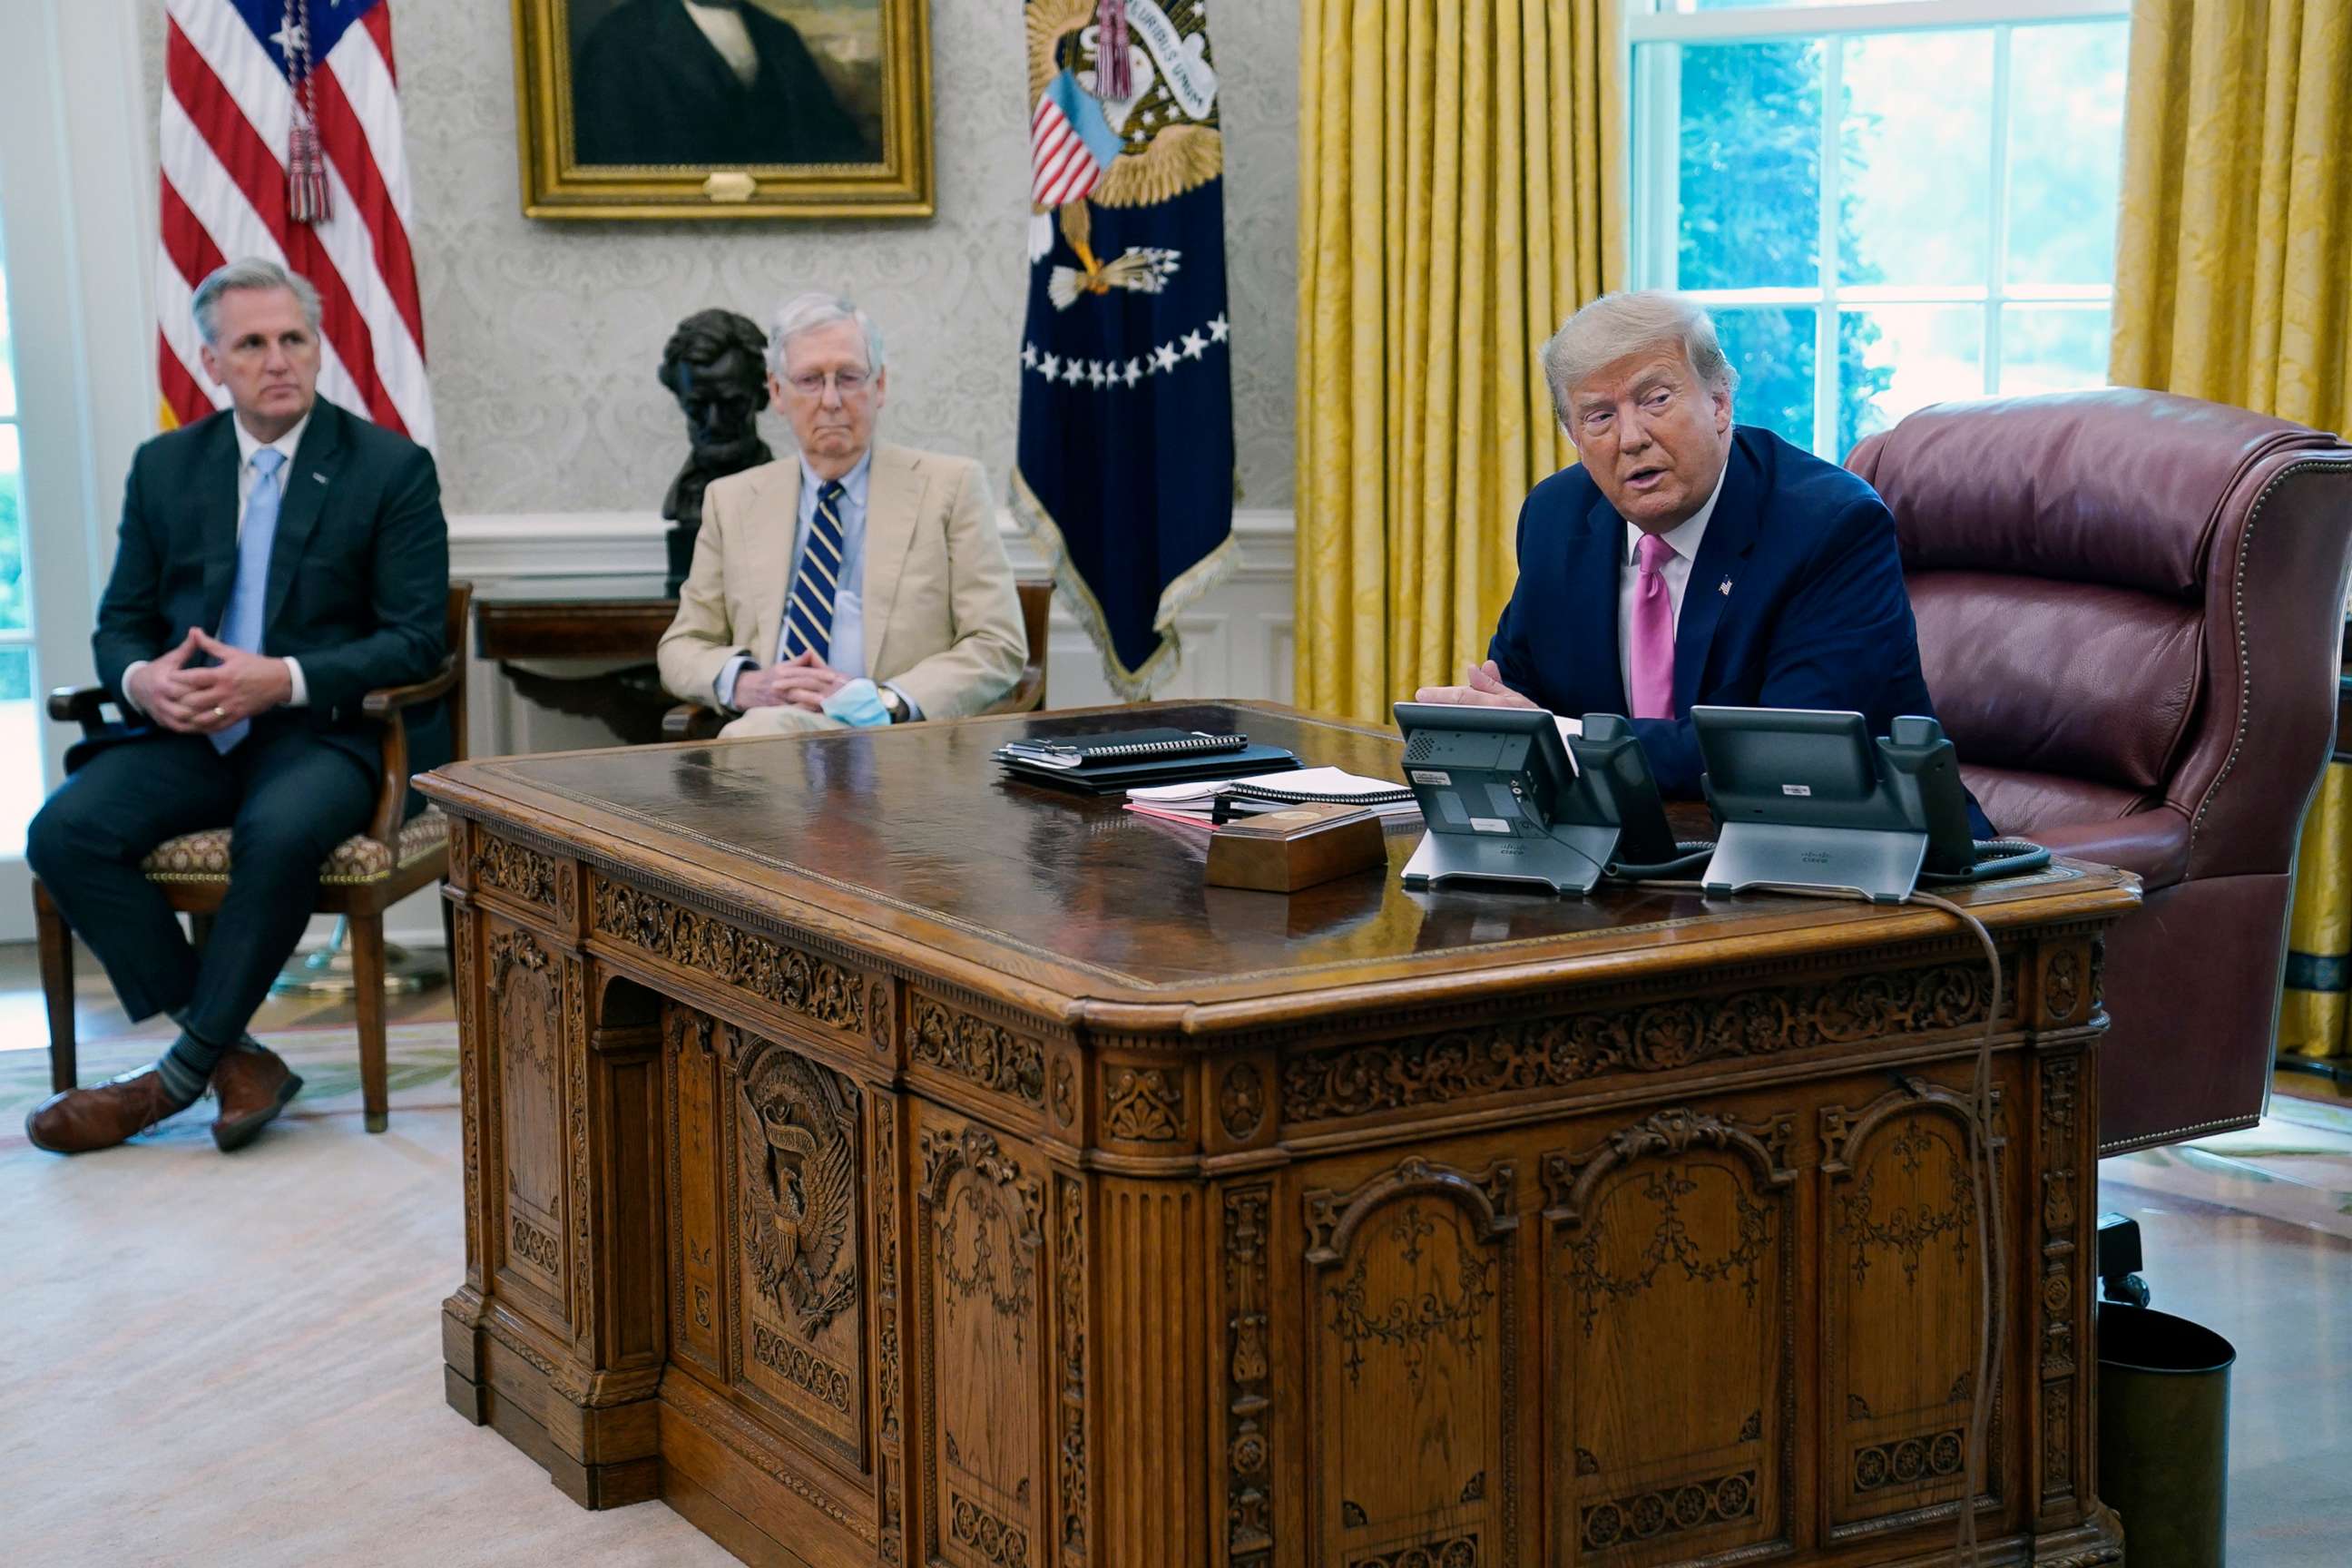 PHOTO: President Donald Trump meets with Senate Majority Leader Mitch McConnell, center, and House Minority Leader Kevin McCarthy in the Oval Office at the White House, July 20, 2020, in Washington.